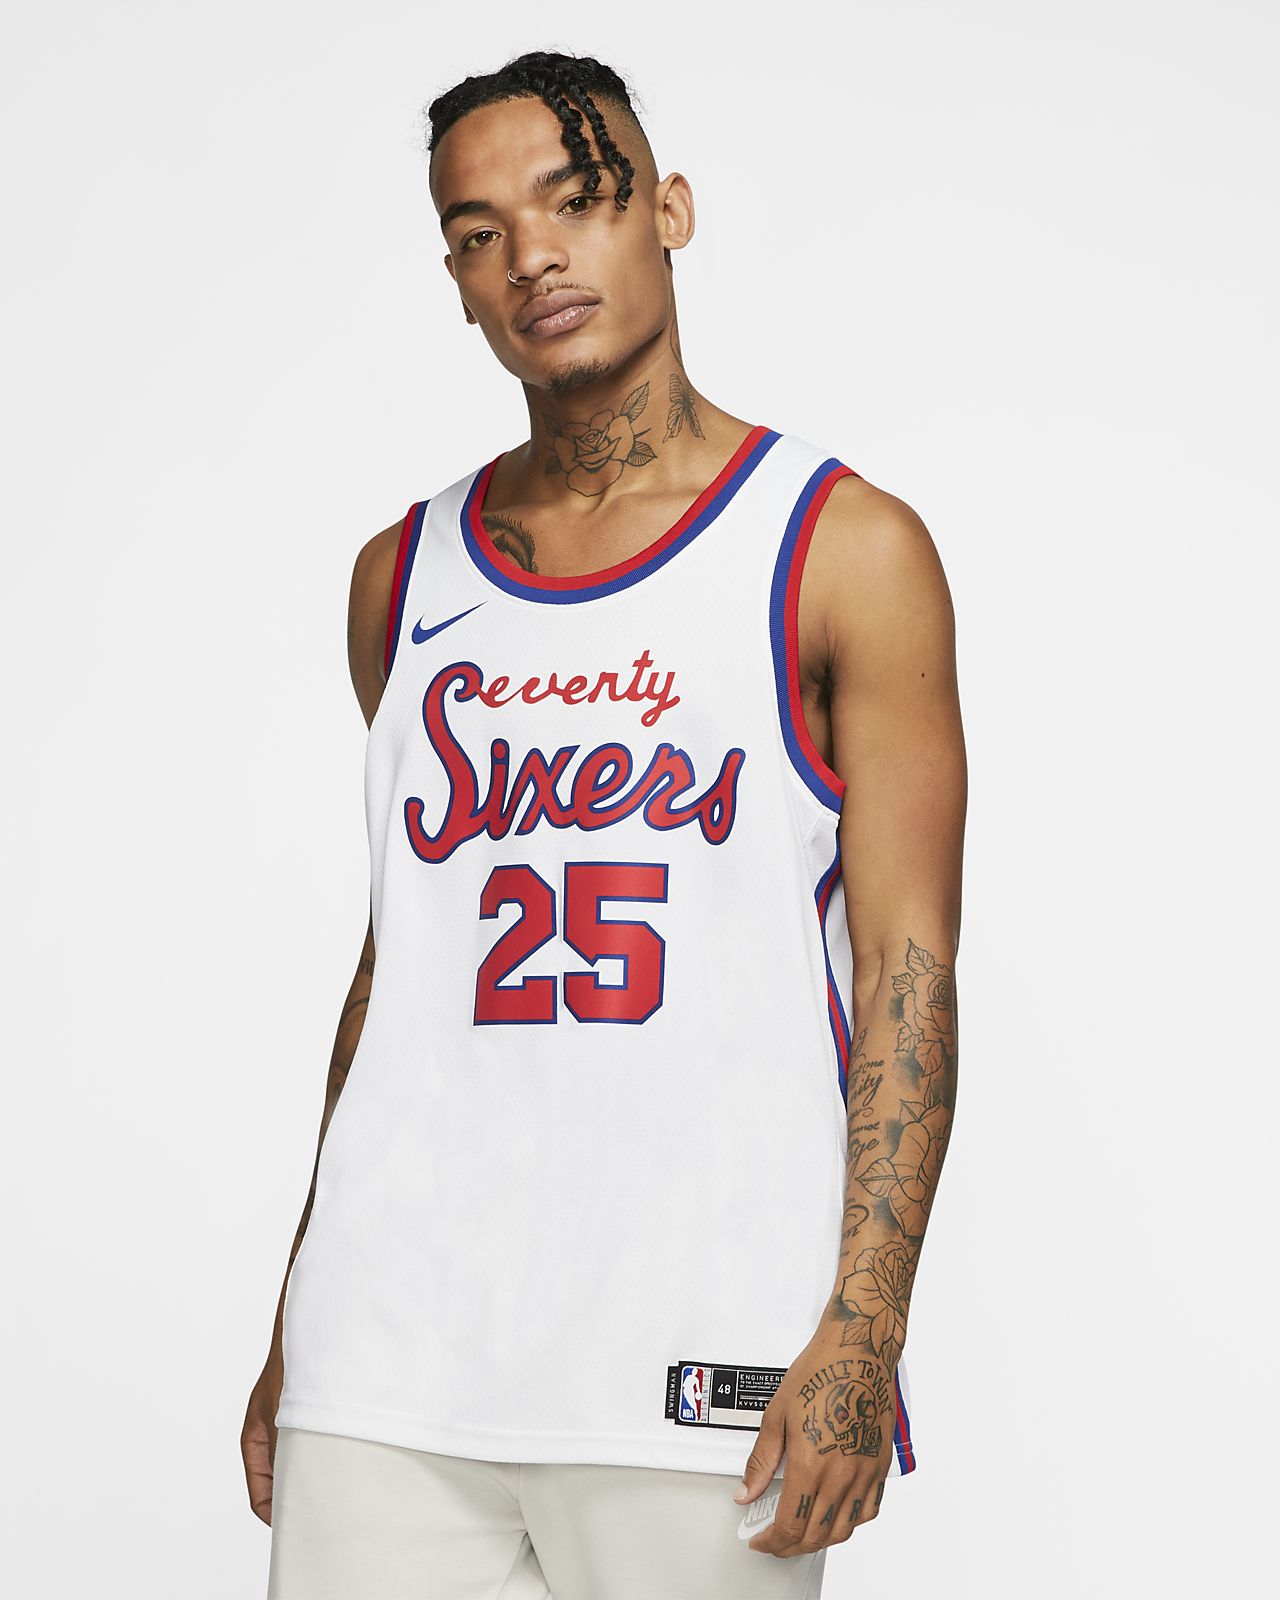 76ers classic edition jersey